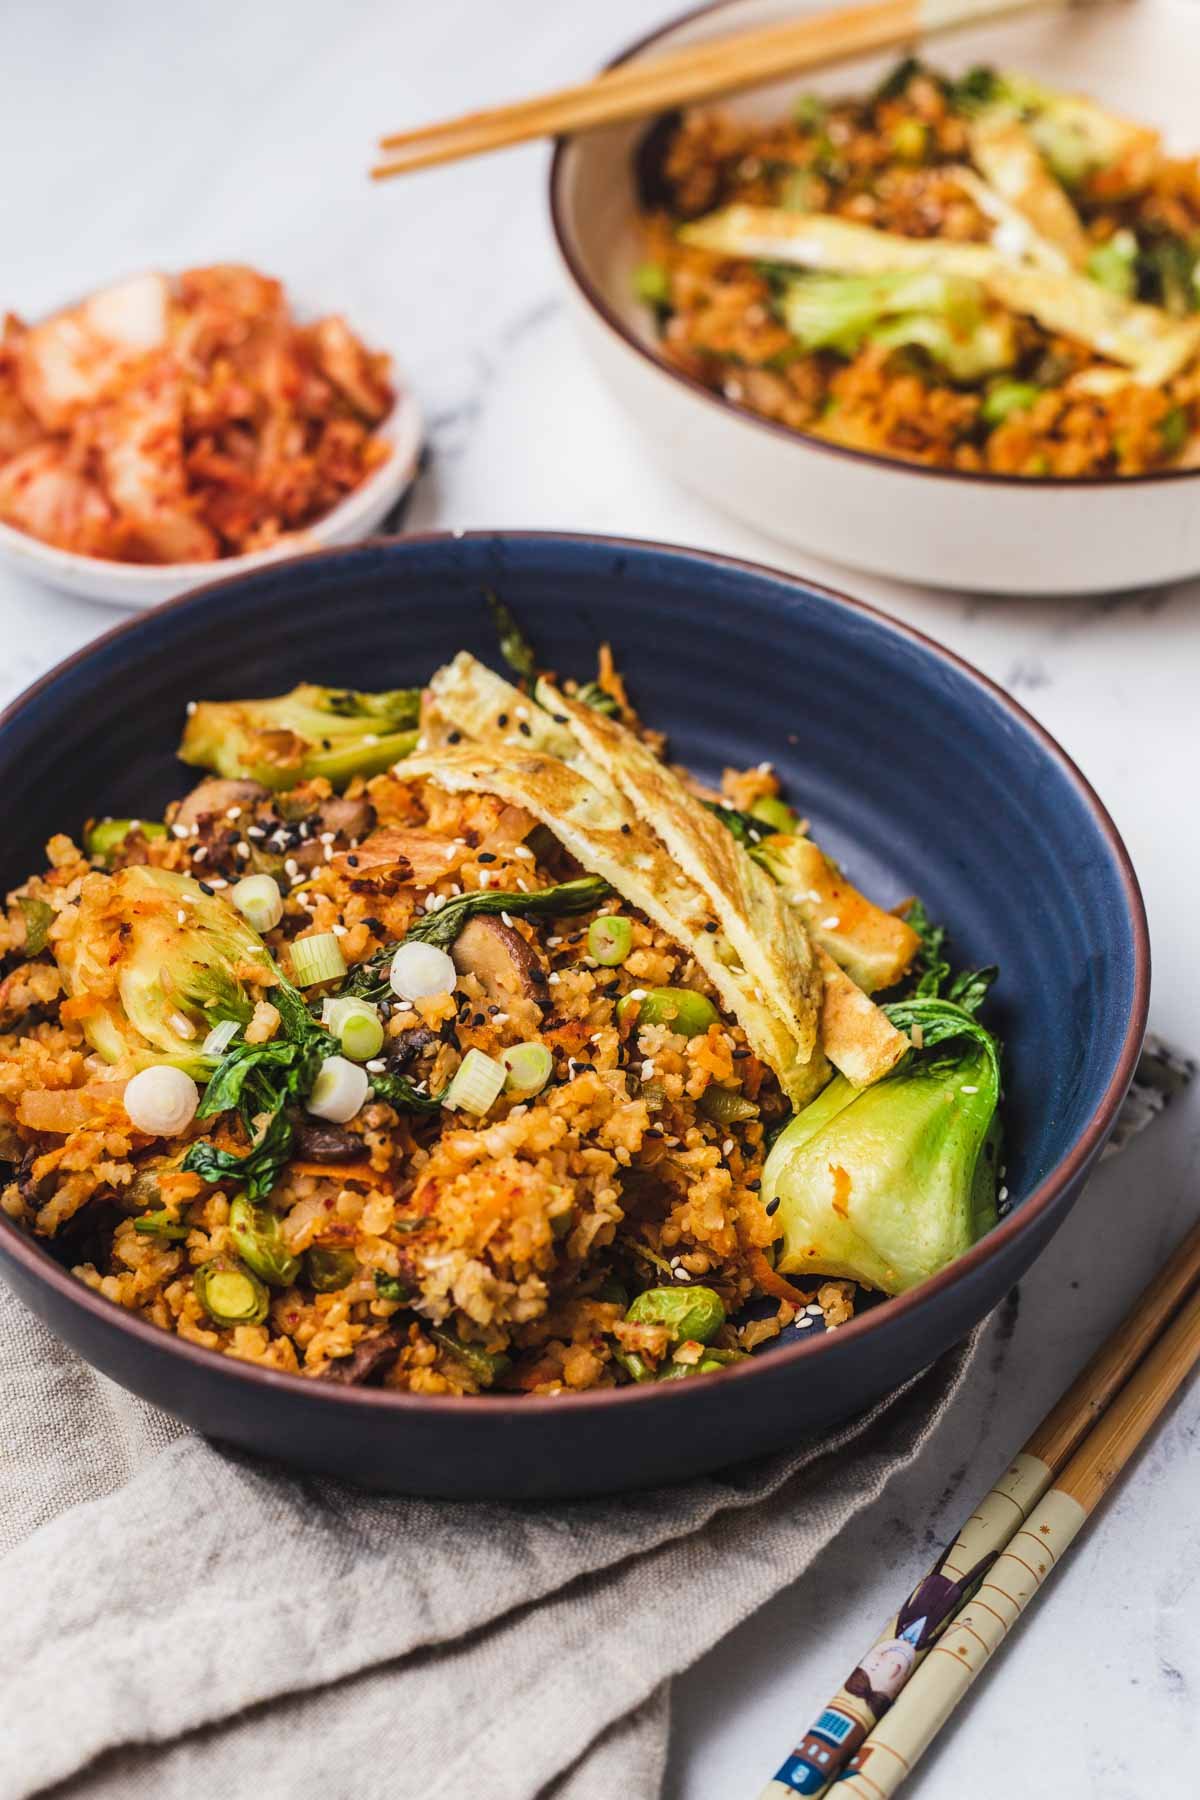 A close up of the fried rice dish in a blue bowl topped with green onions and vegetables with kimchi and a second bowl in the background.